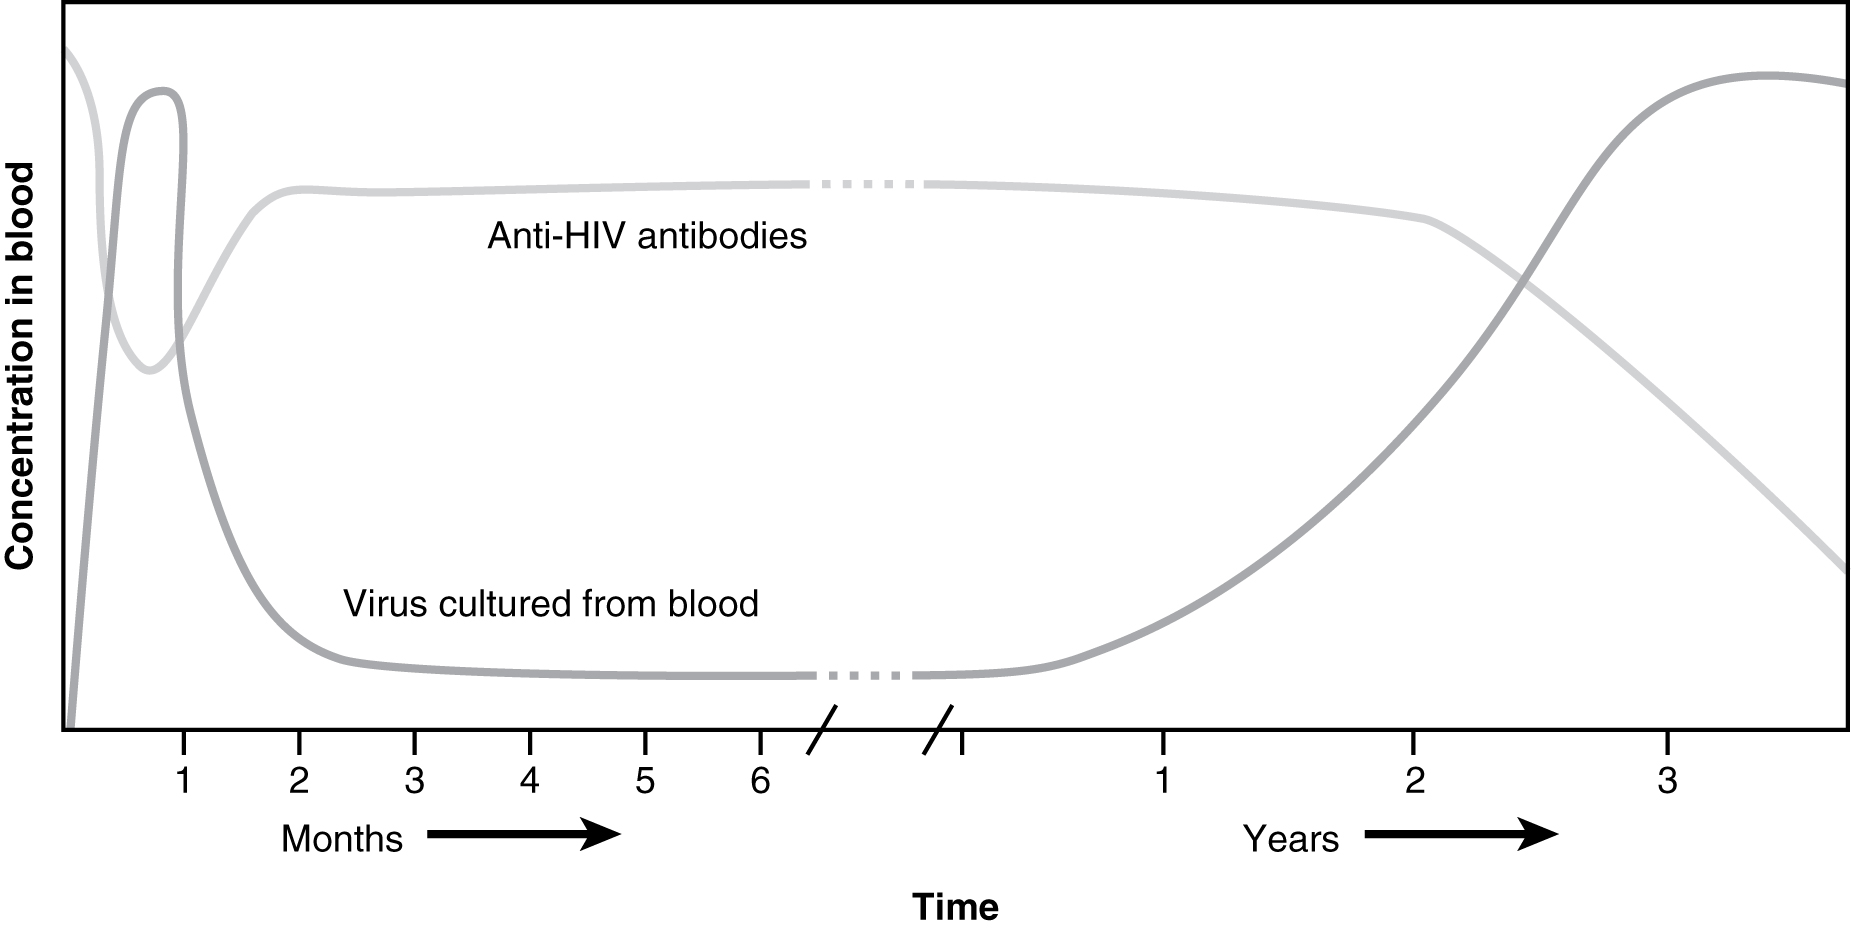 This graph shows the concentration of HIV viral particles in blood over time in years.